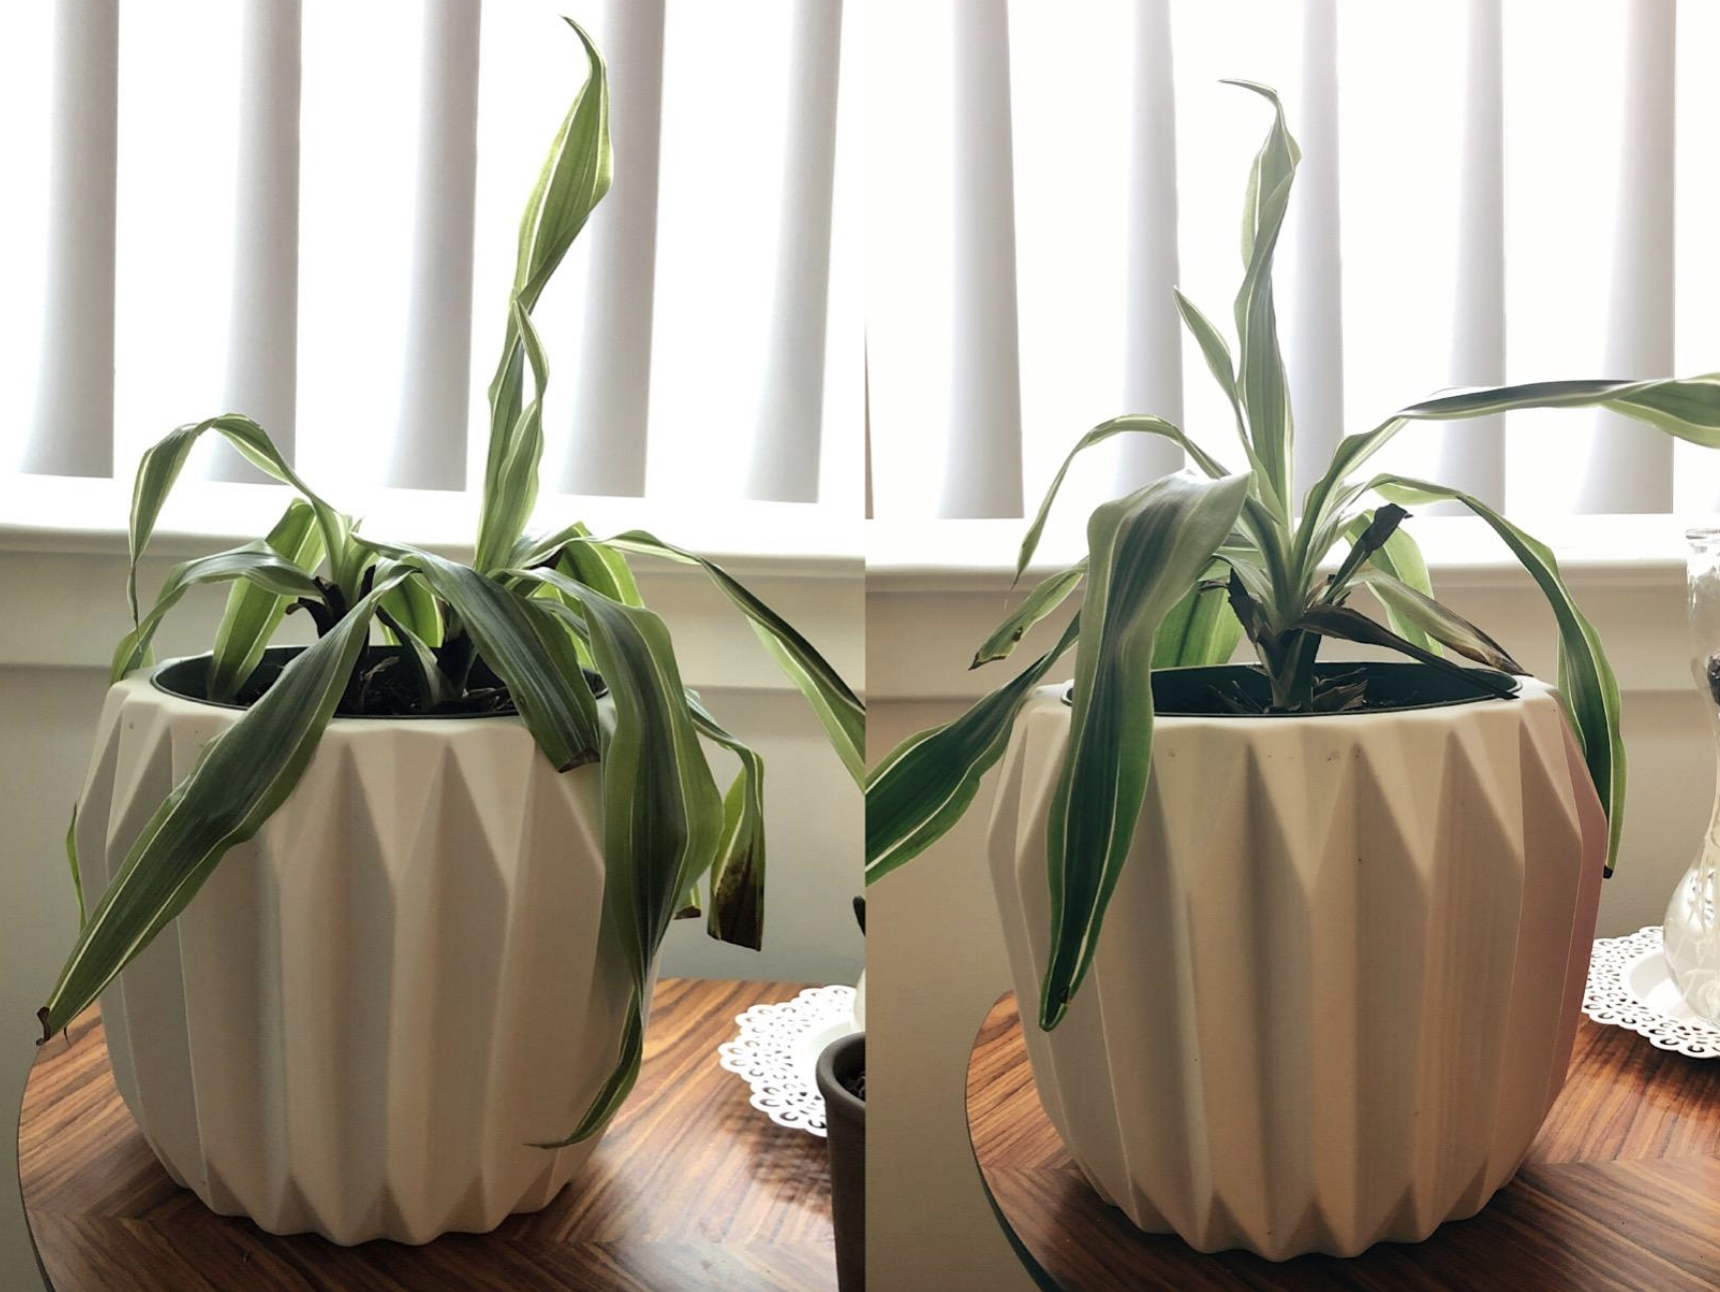 on the left, a wilting plant and on the right, the same plant growing 